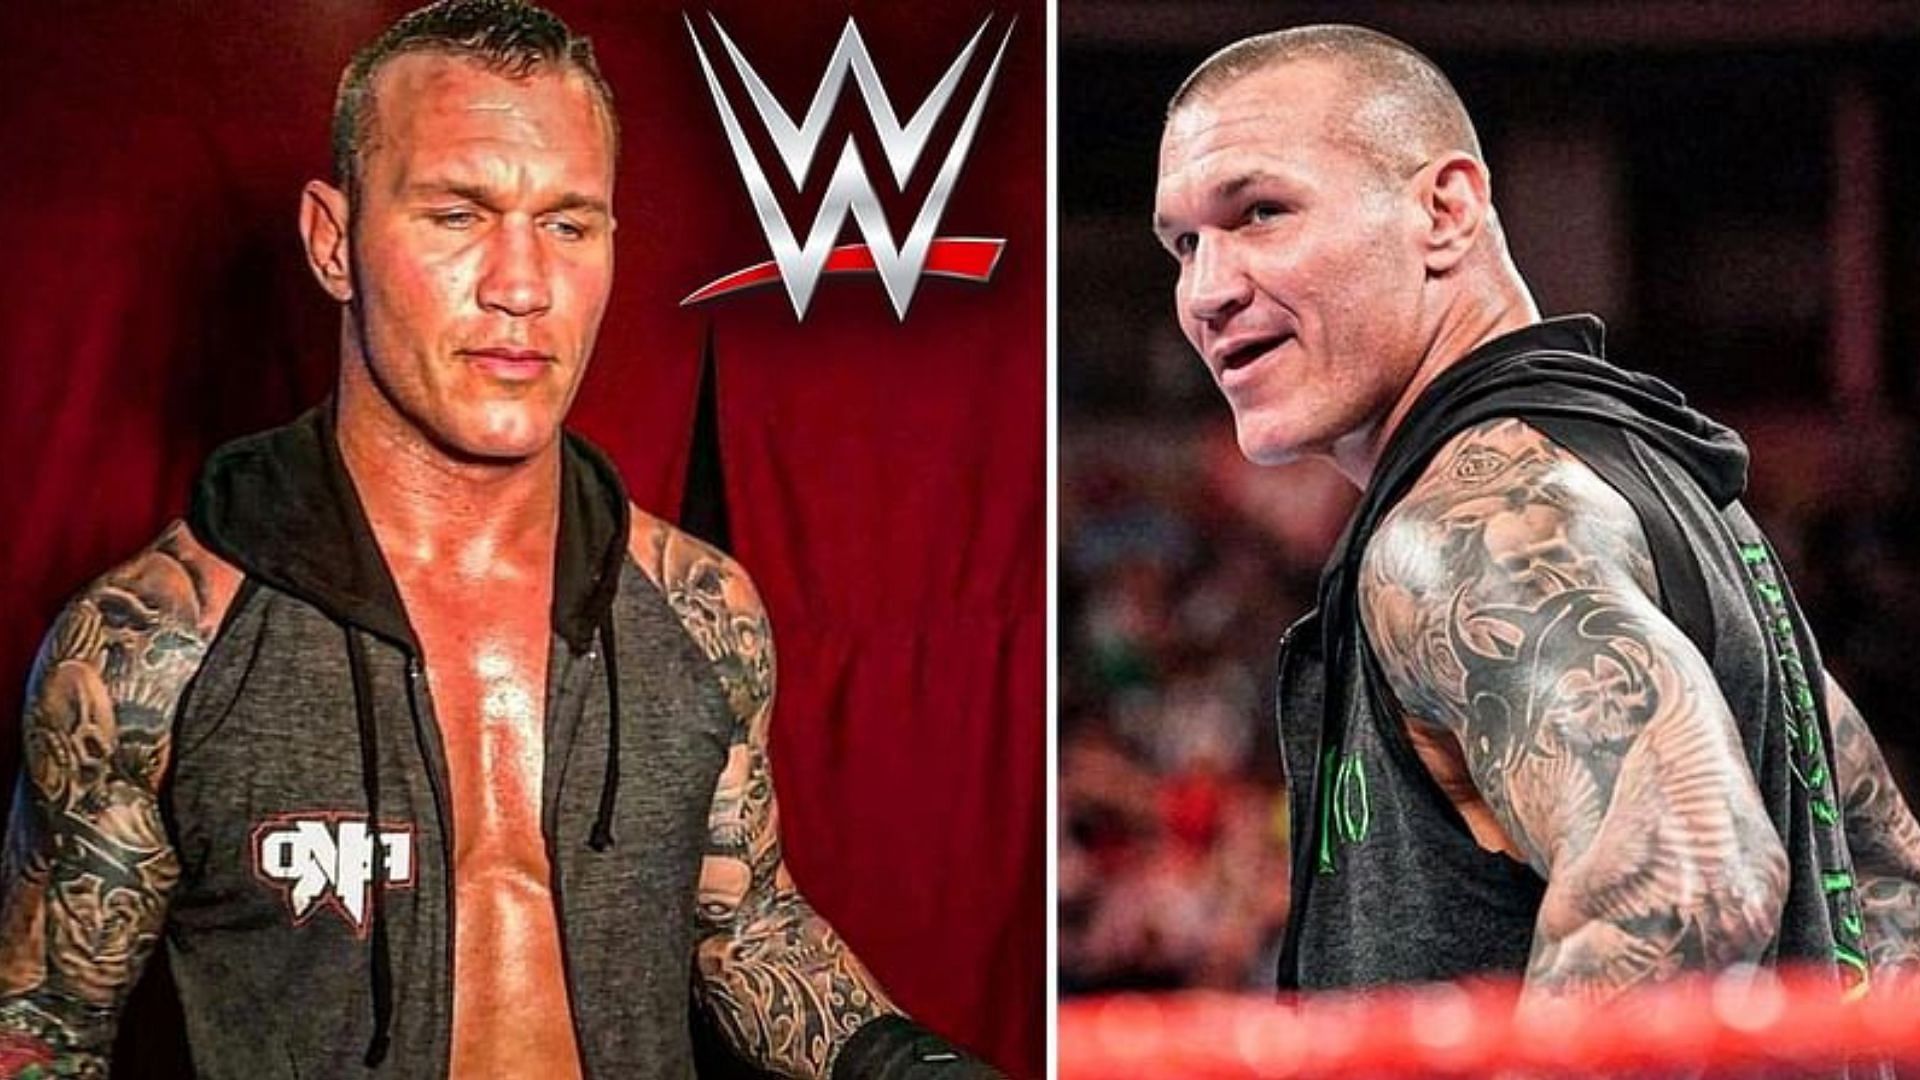 Randy Orton has not been seen on WWE TV since last May